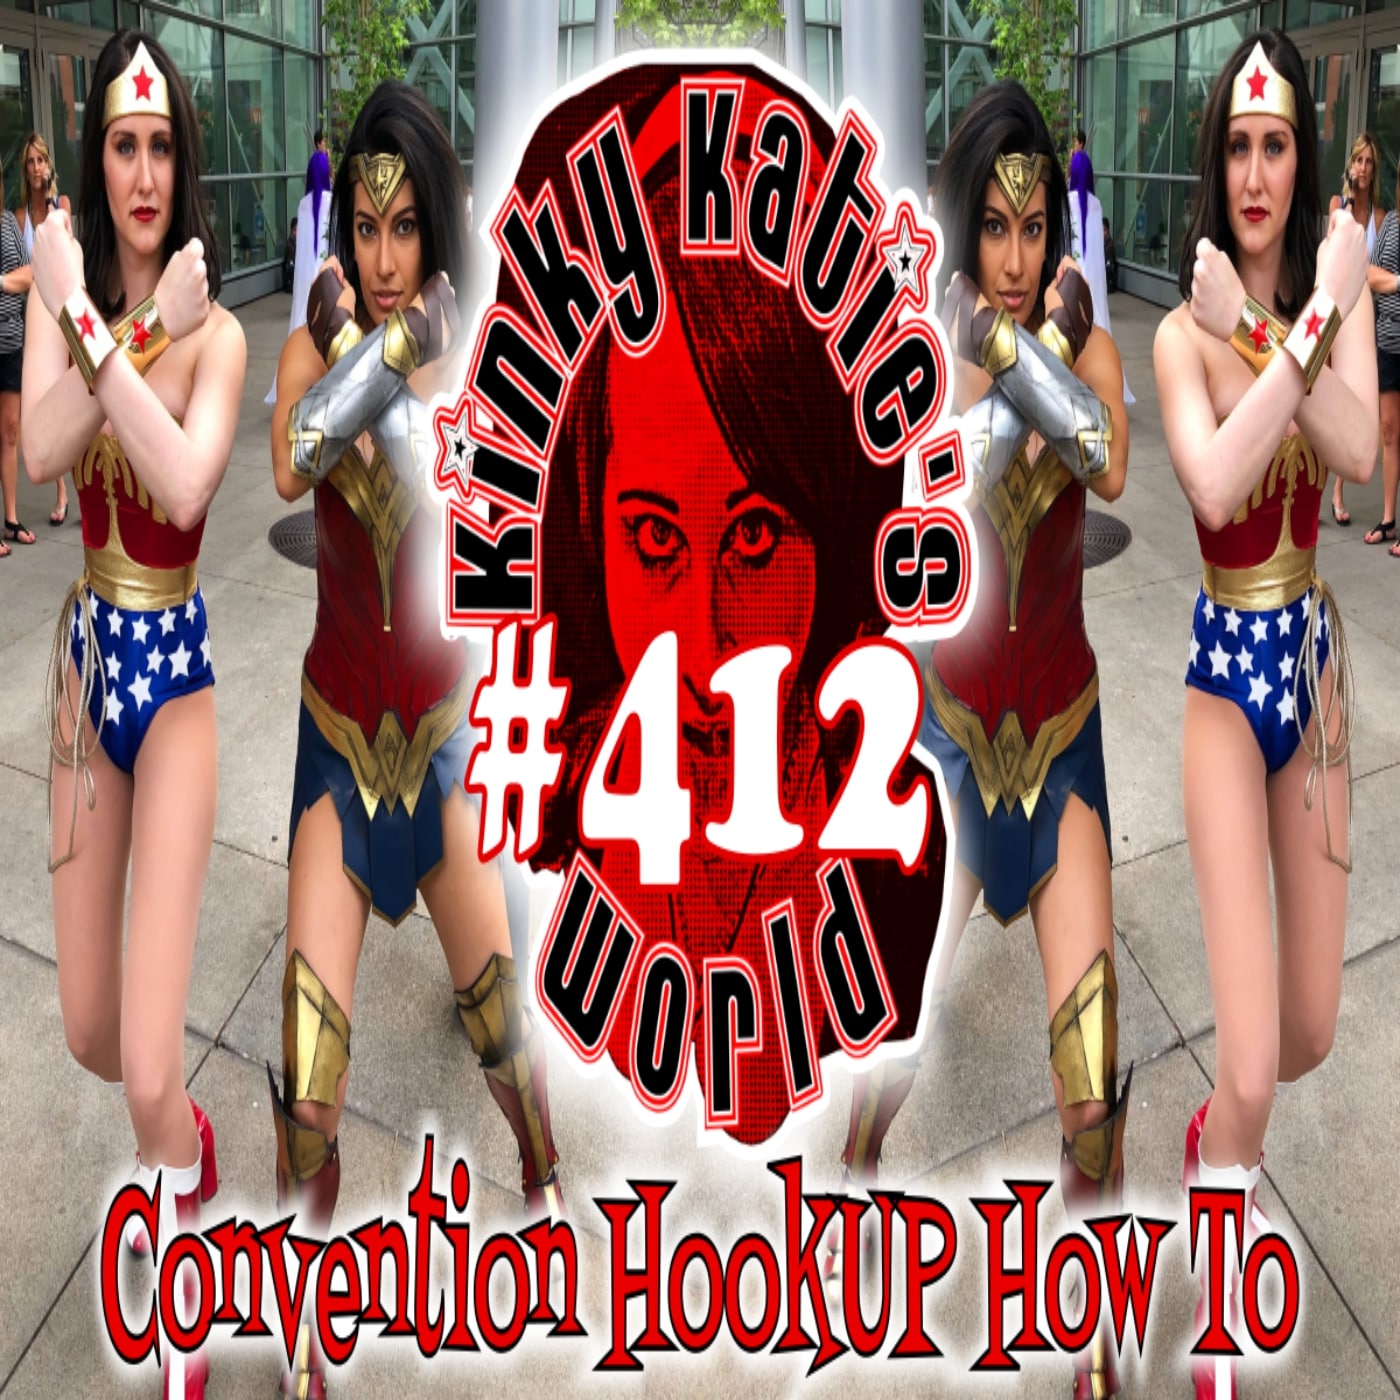 #412 – Convention HookUp How To